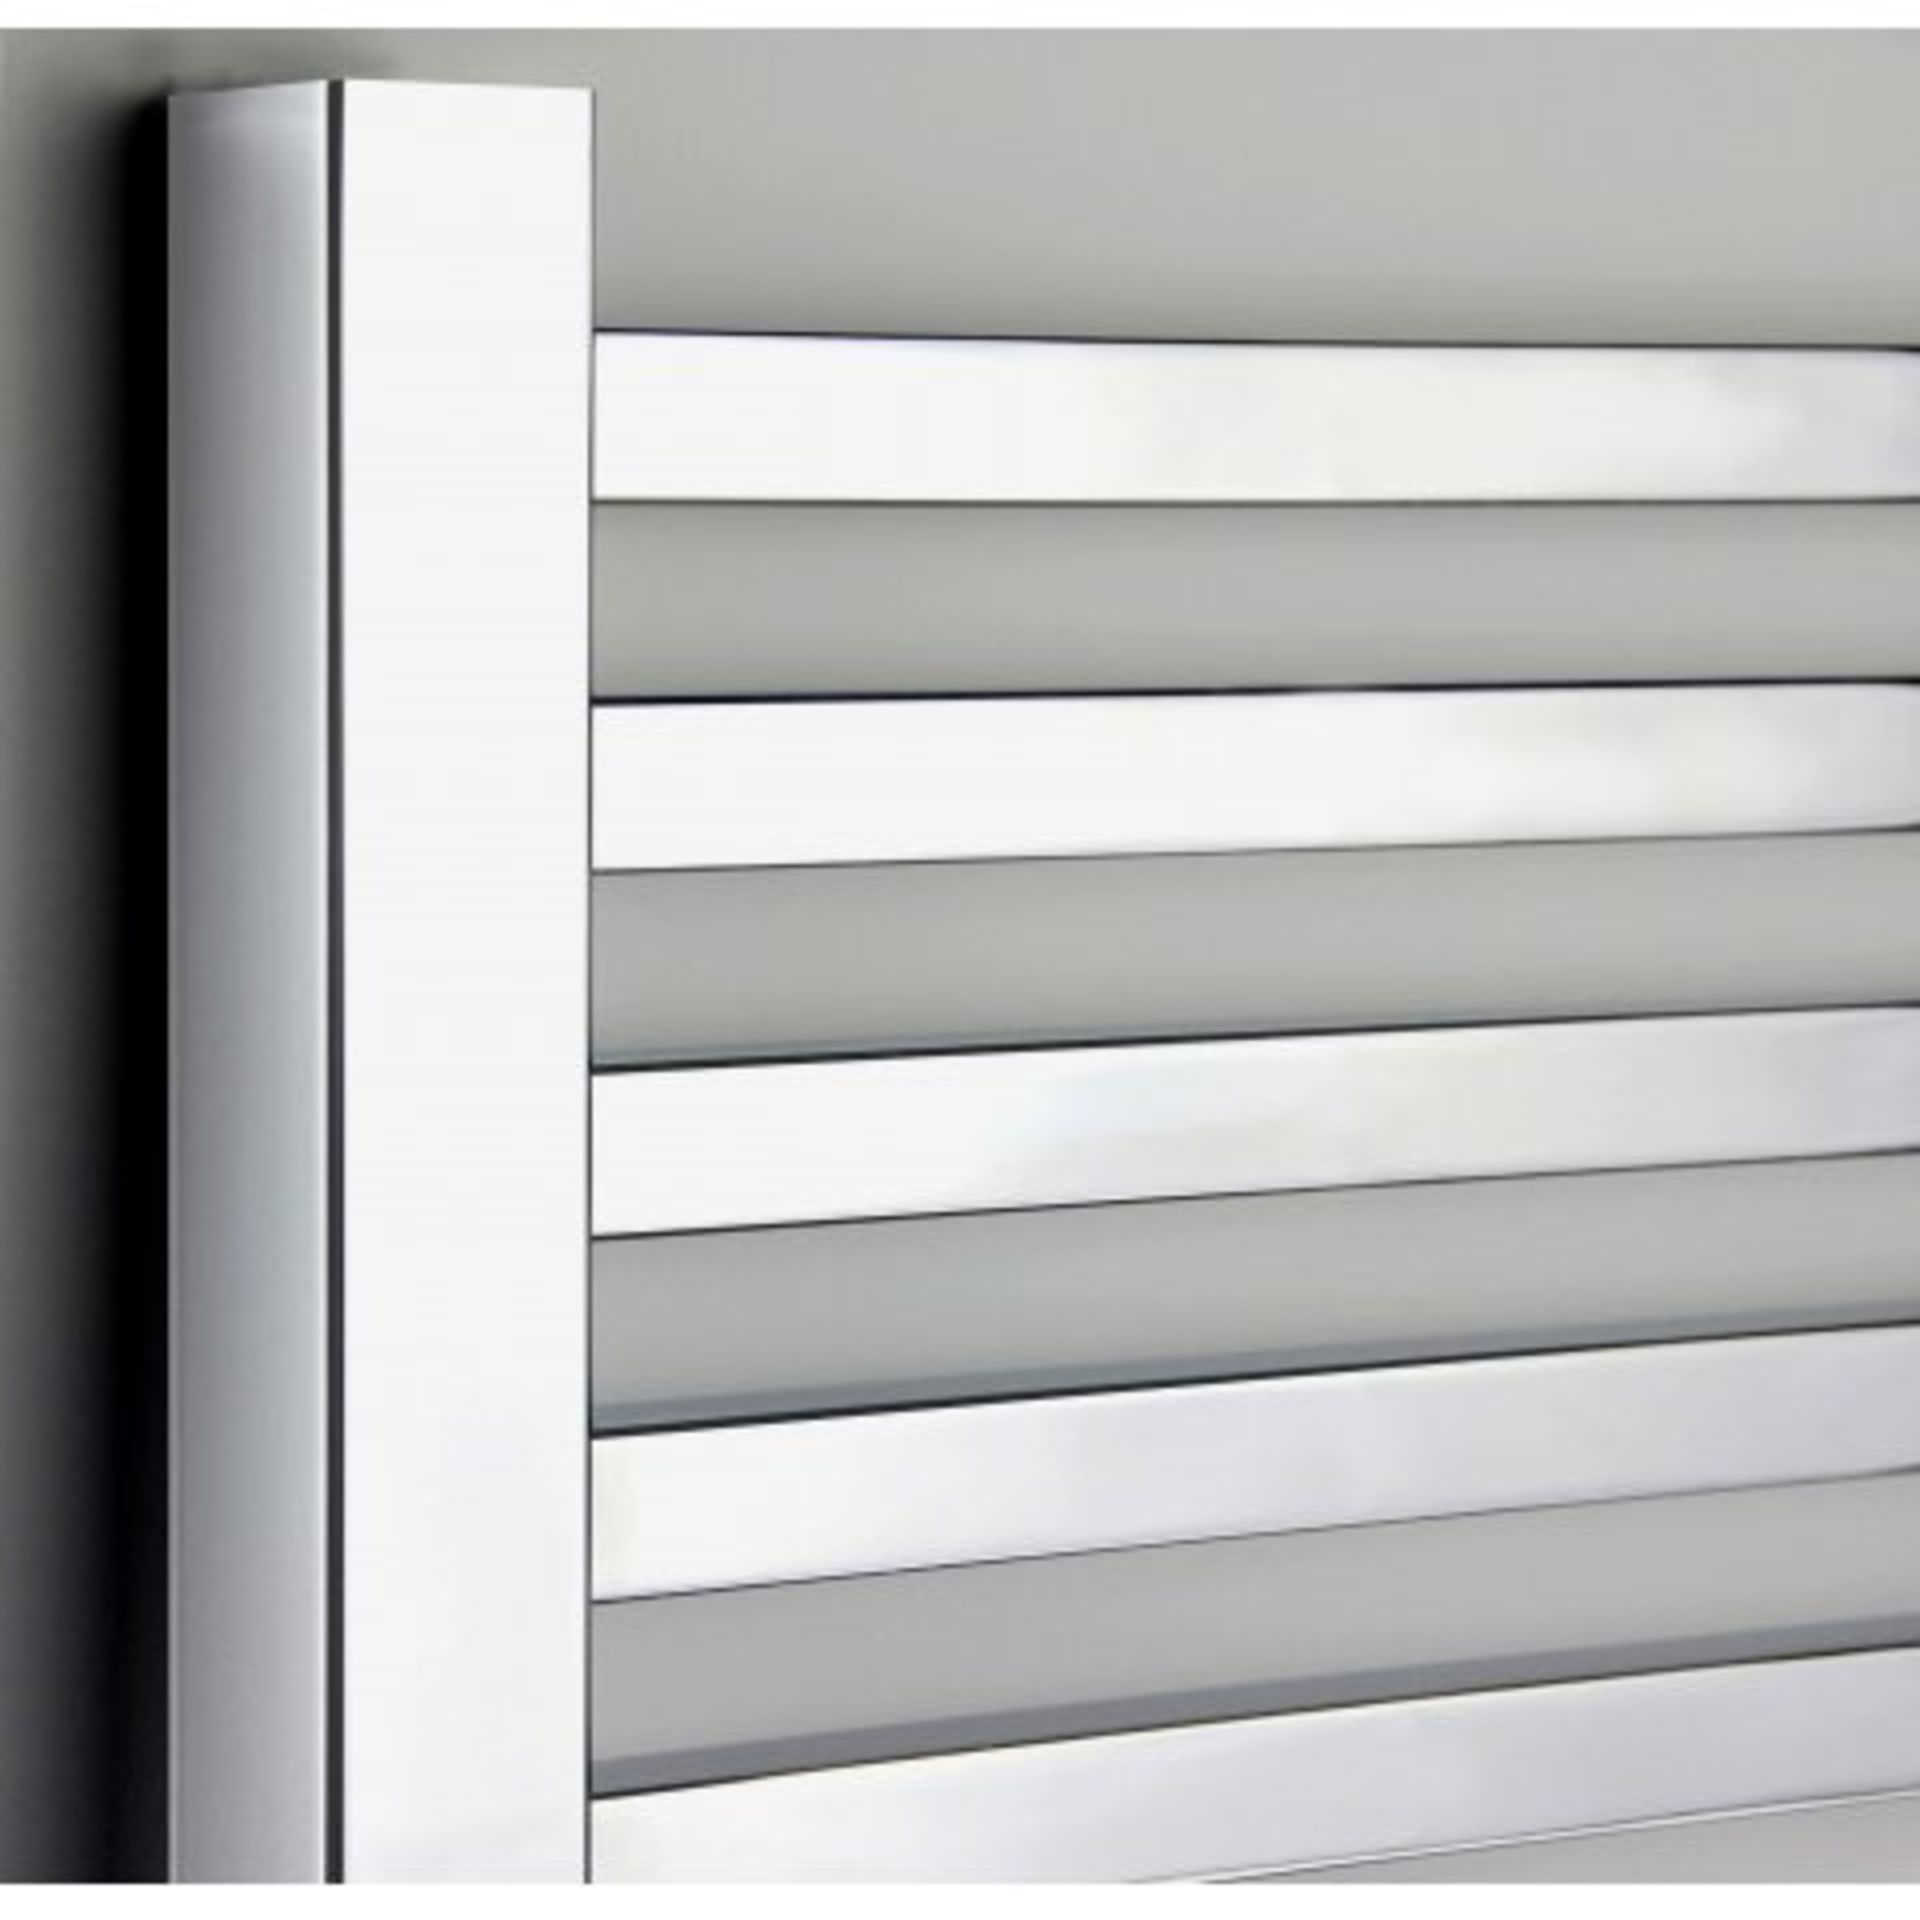 (L4) 1600x600mm Chrome Square Rail Ladder Towel Radiator RRP £332.99 Our Virginia 1600x600mm - Image 7 of 9